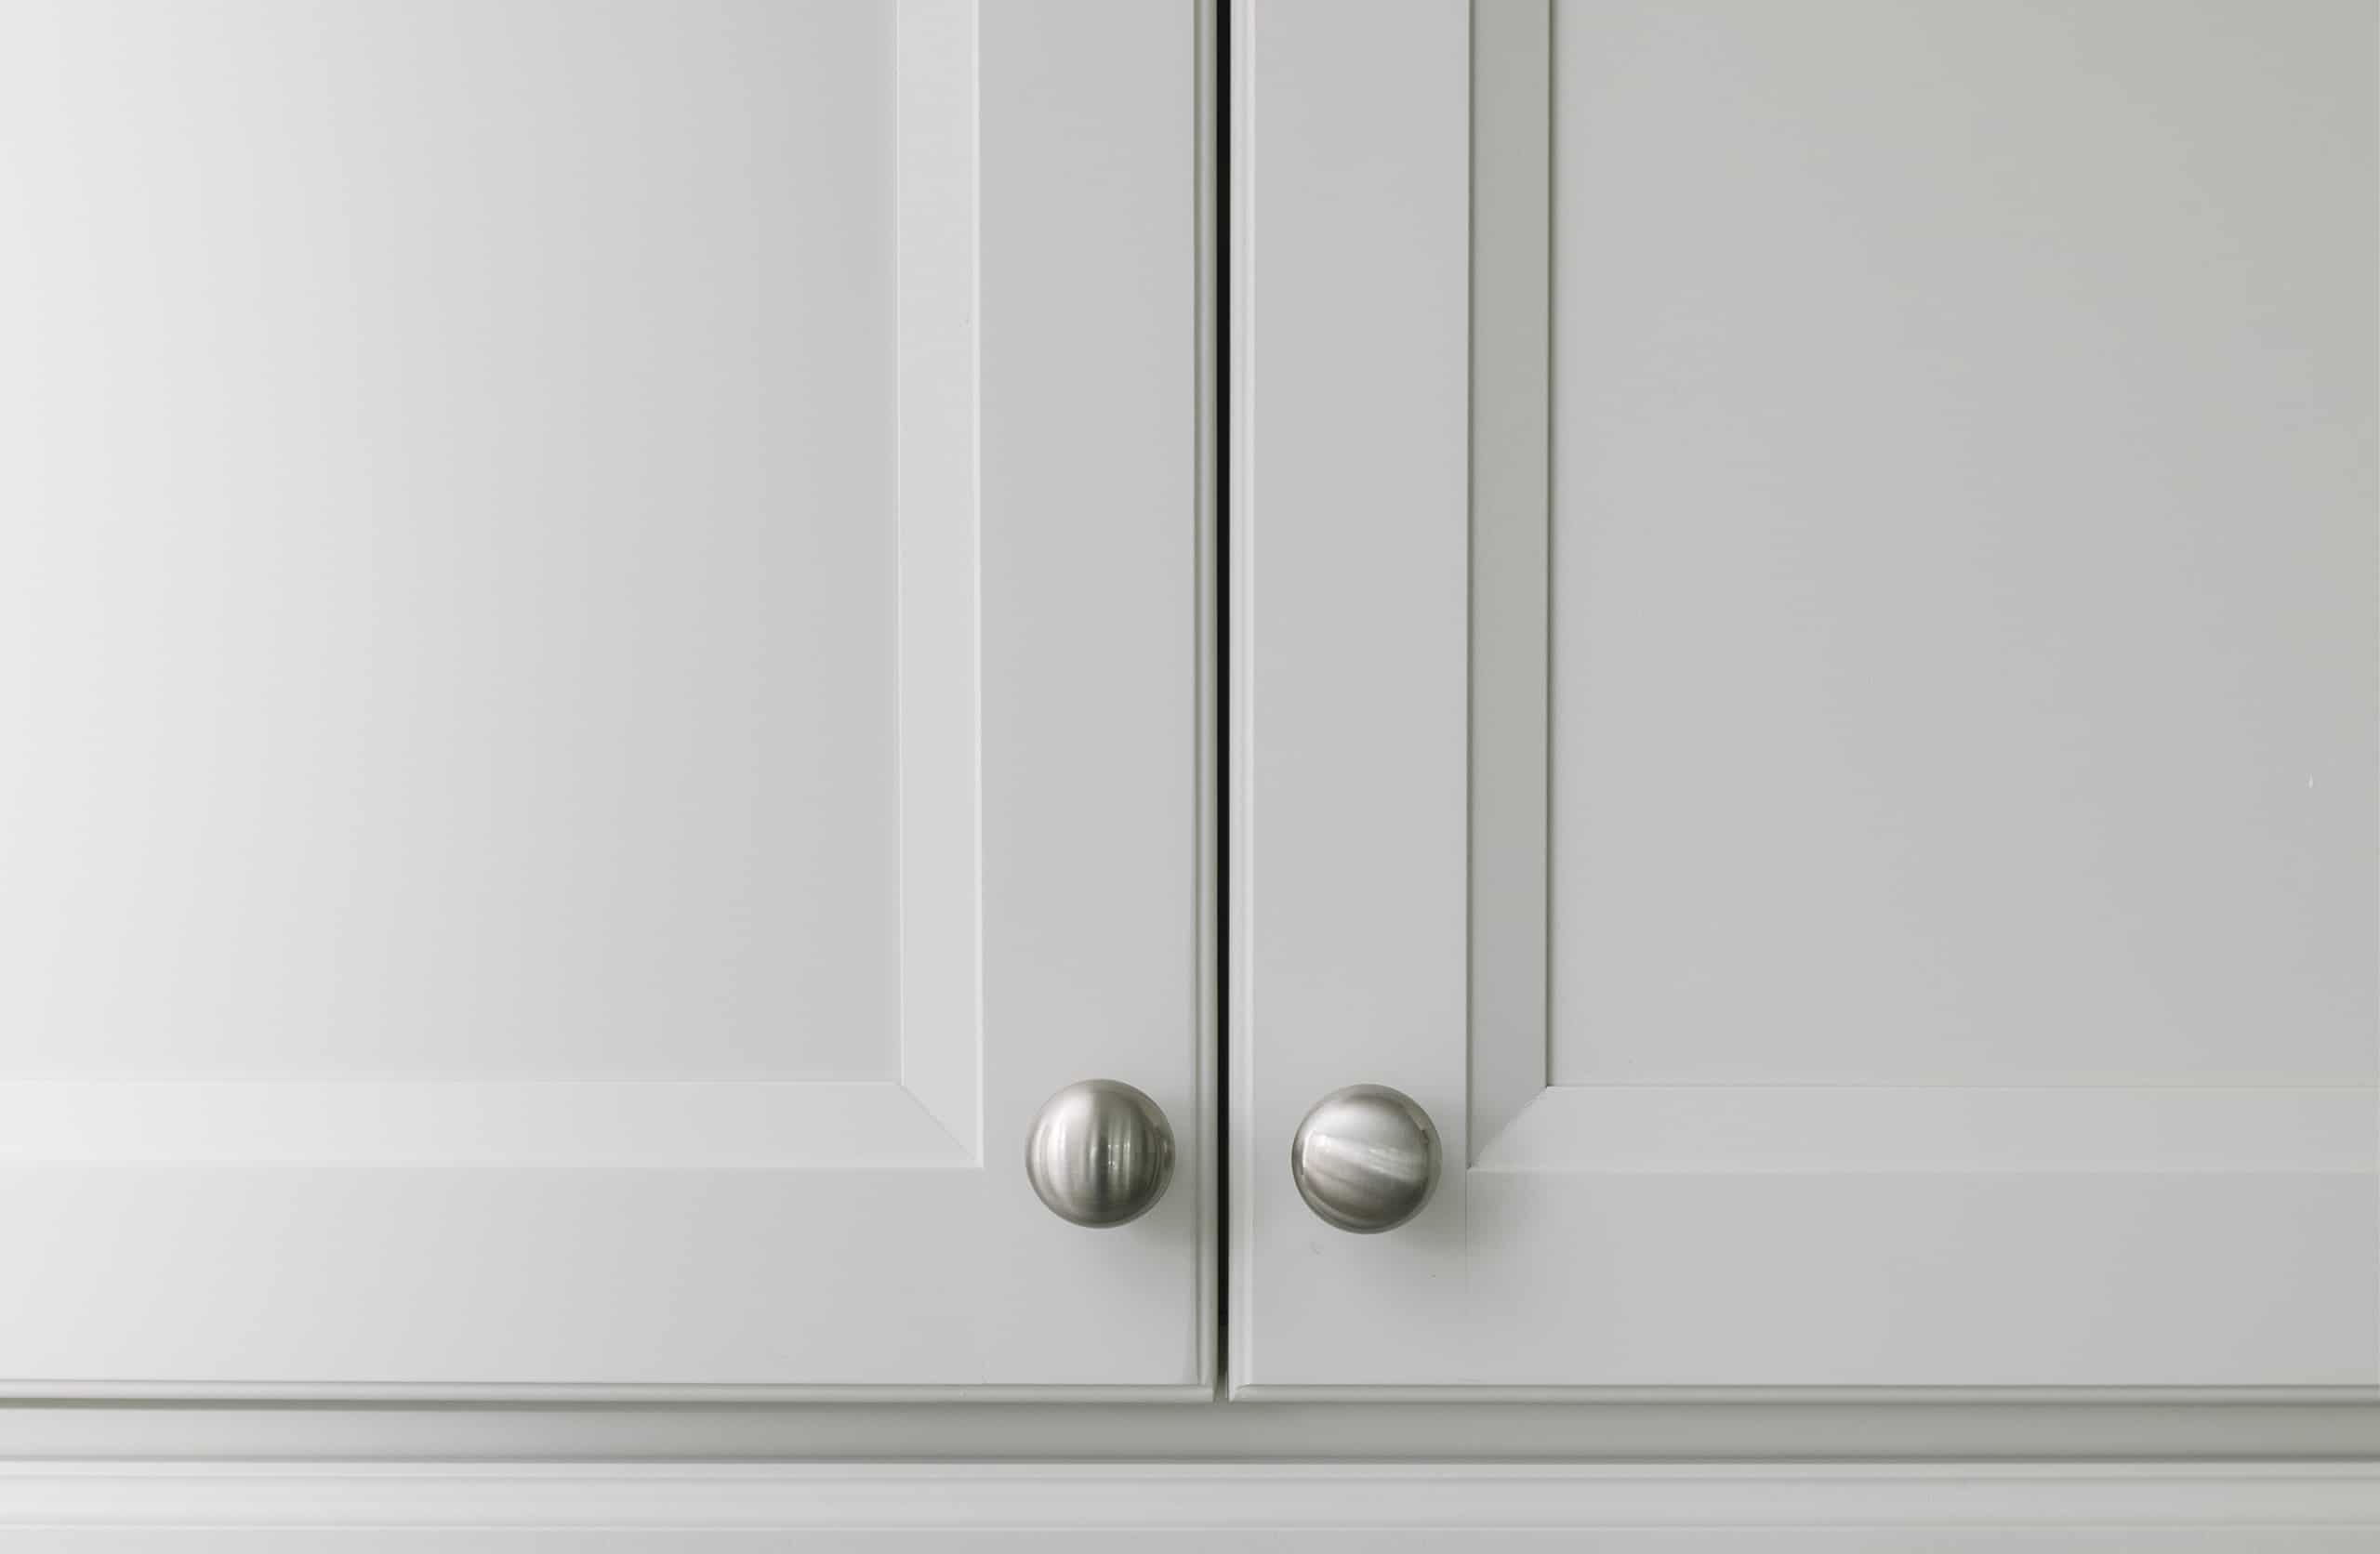 How To Install Knobs On Cabinet Doors, Where To Install Cabinet Knobs